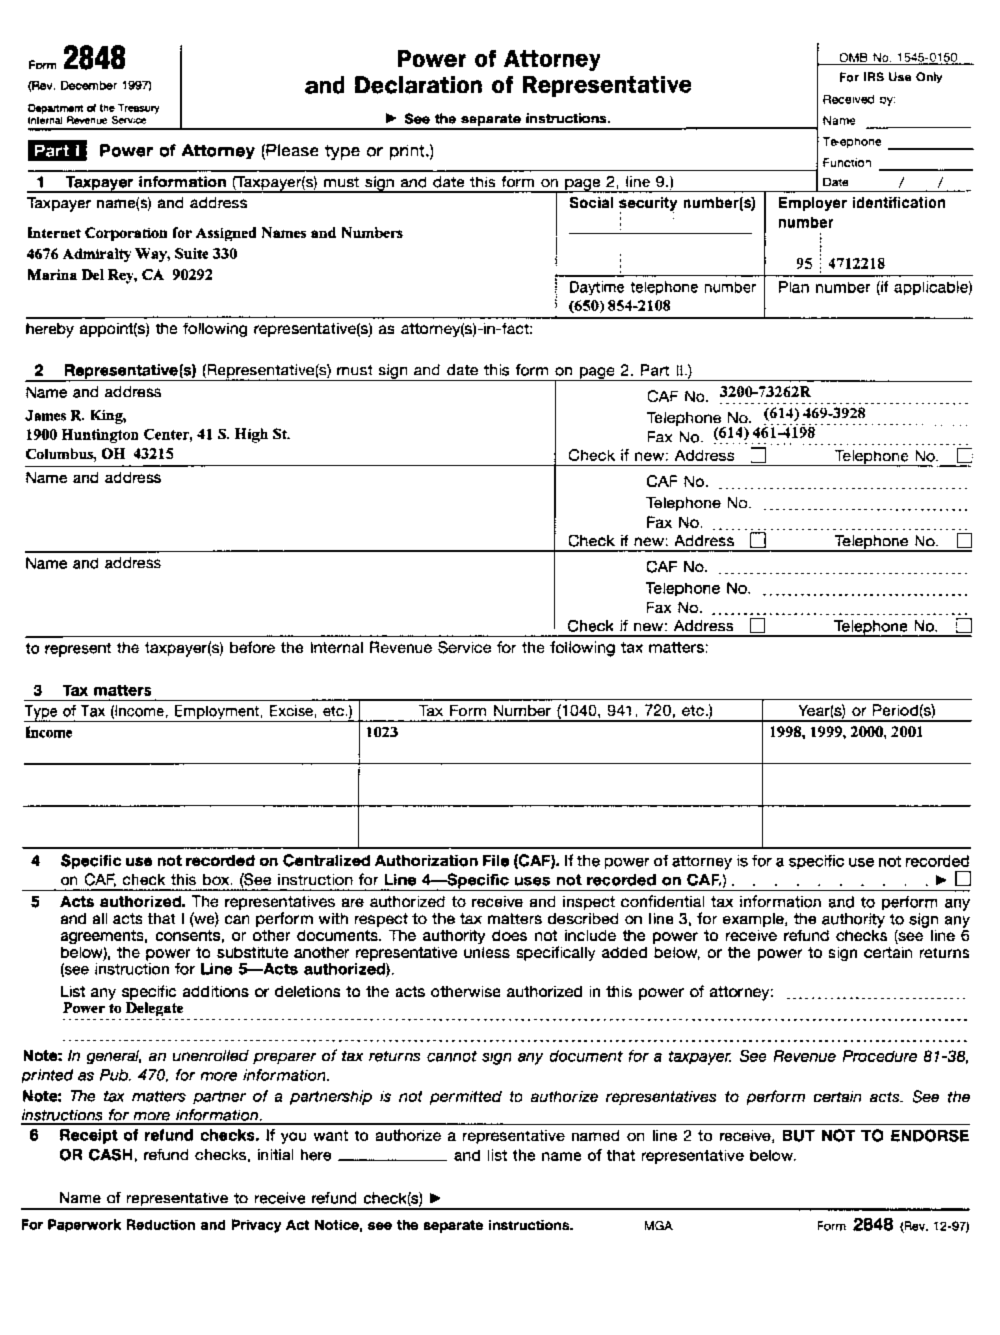 Form 2848 Power of Attorney and Declaration of Representative (Page 1)